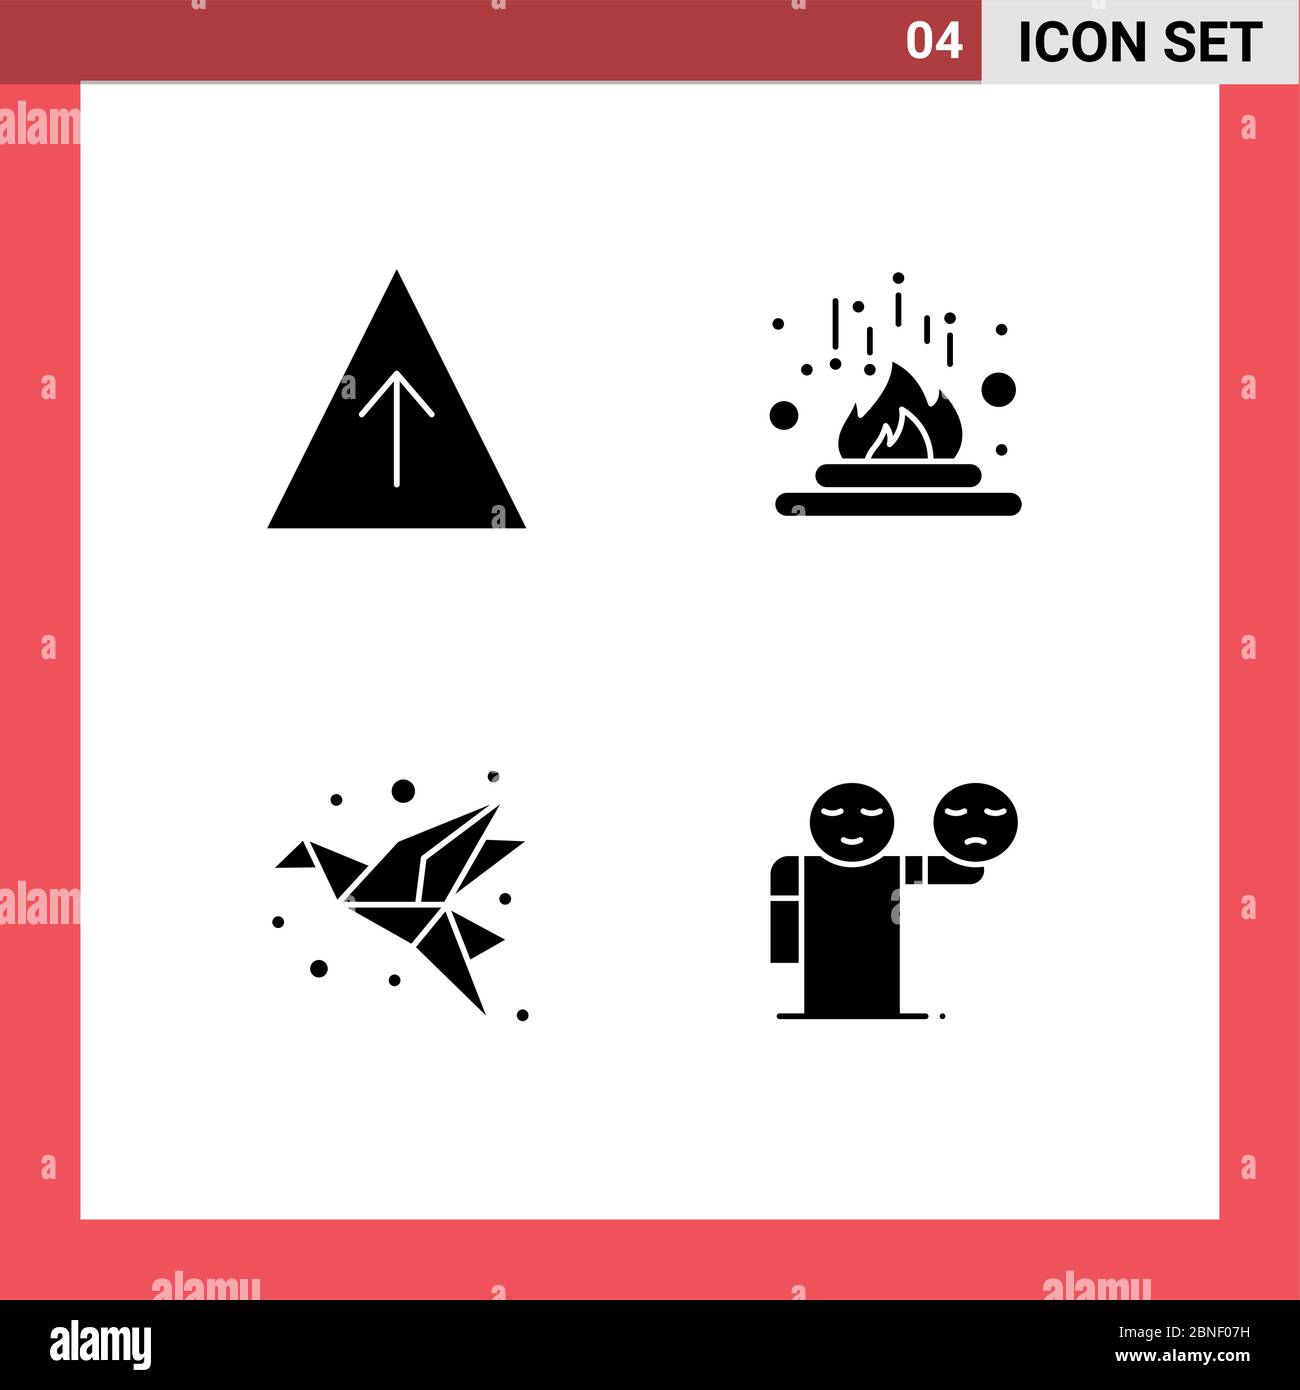 Mobile Interface Solid Glyph Set of 4 Pictograms of career, bird, chemical, laboratory, origami Editable Vector Design Elements Stock Vector